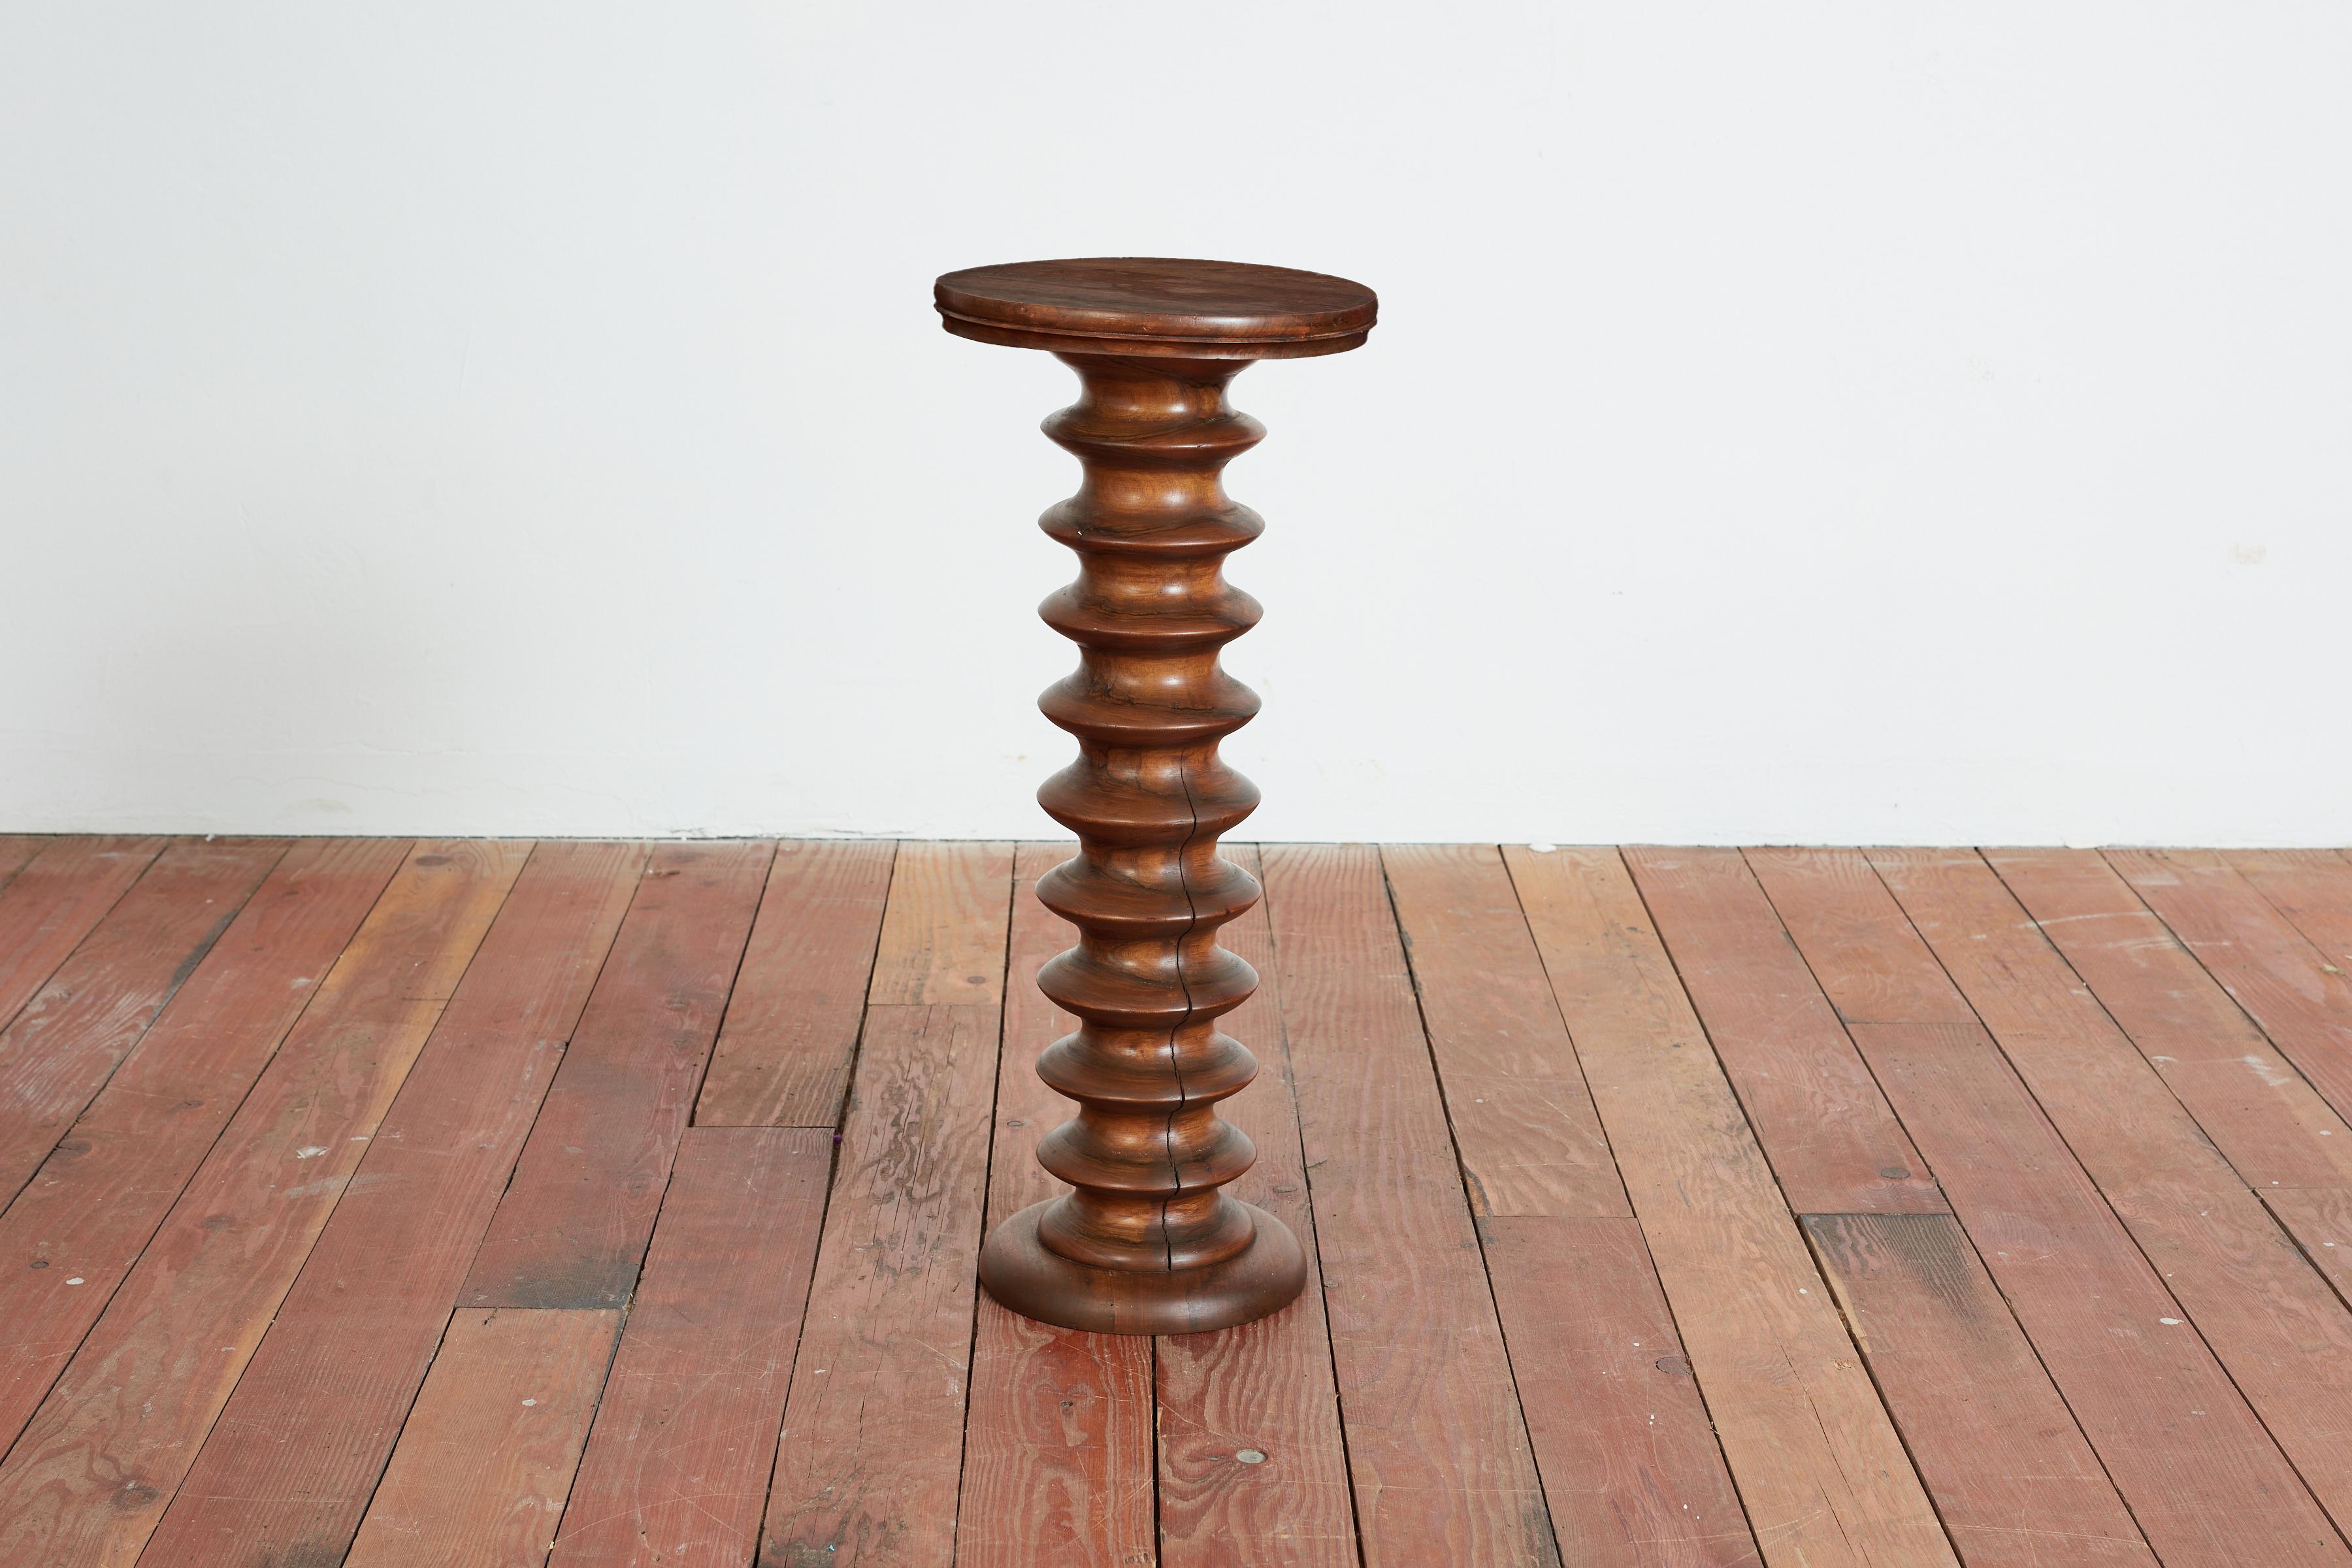 Great sculptural pedestal table attributed to Charles Dudouyt with signature carved corkscrew base.
Wonderful warm patina - clean and simple design. 
France, 1940s.

